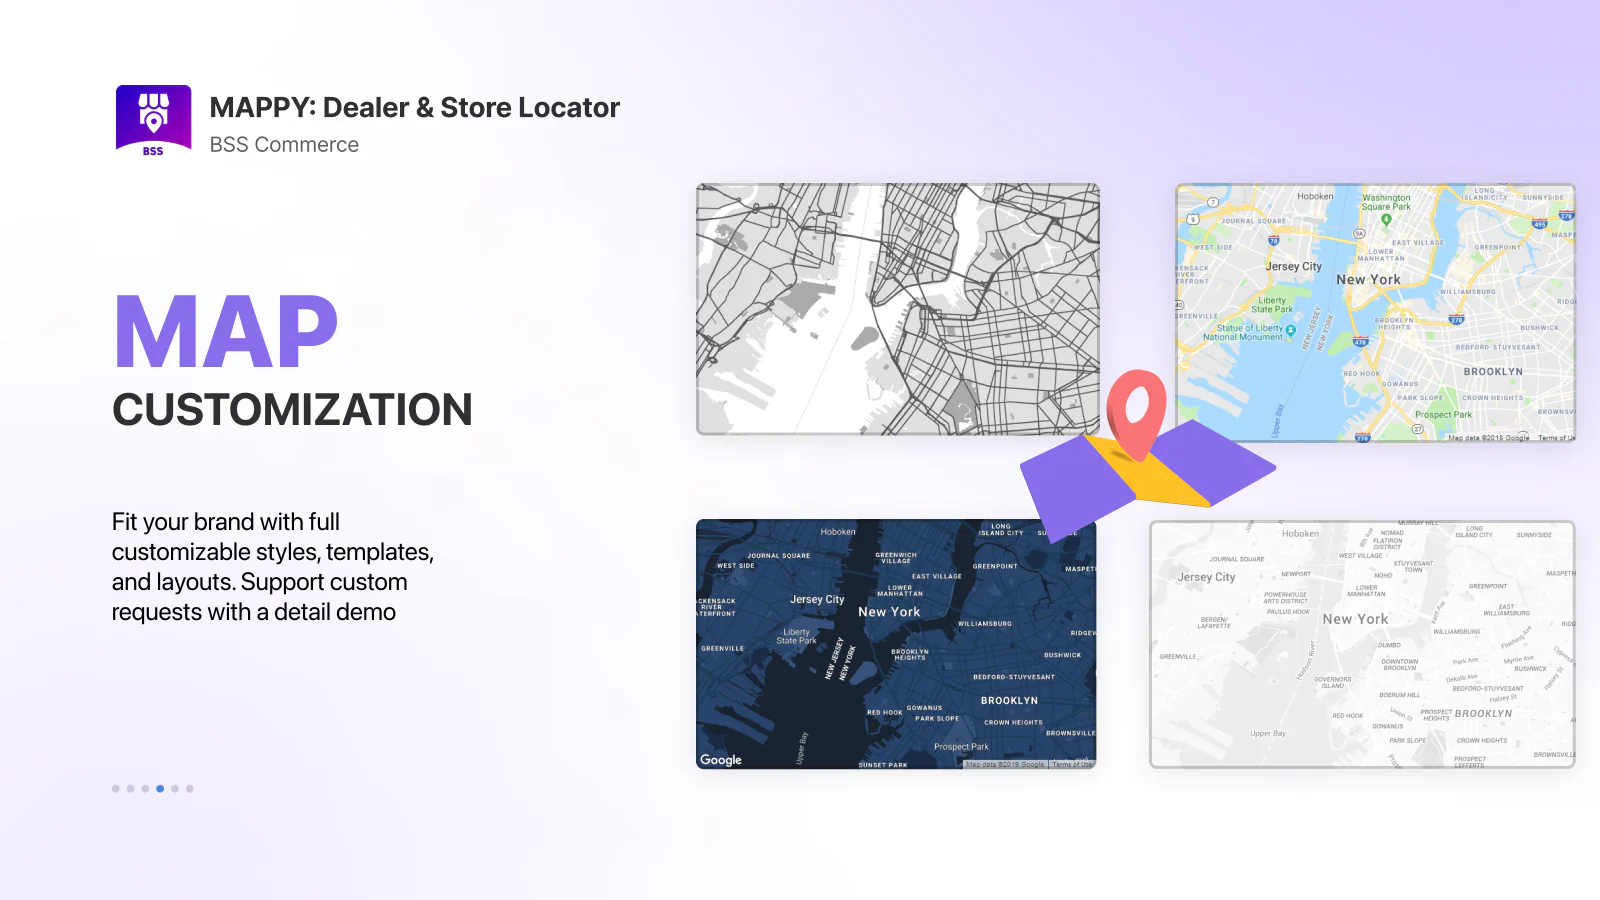 mappy-dealer-and-store-locator-map-customization